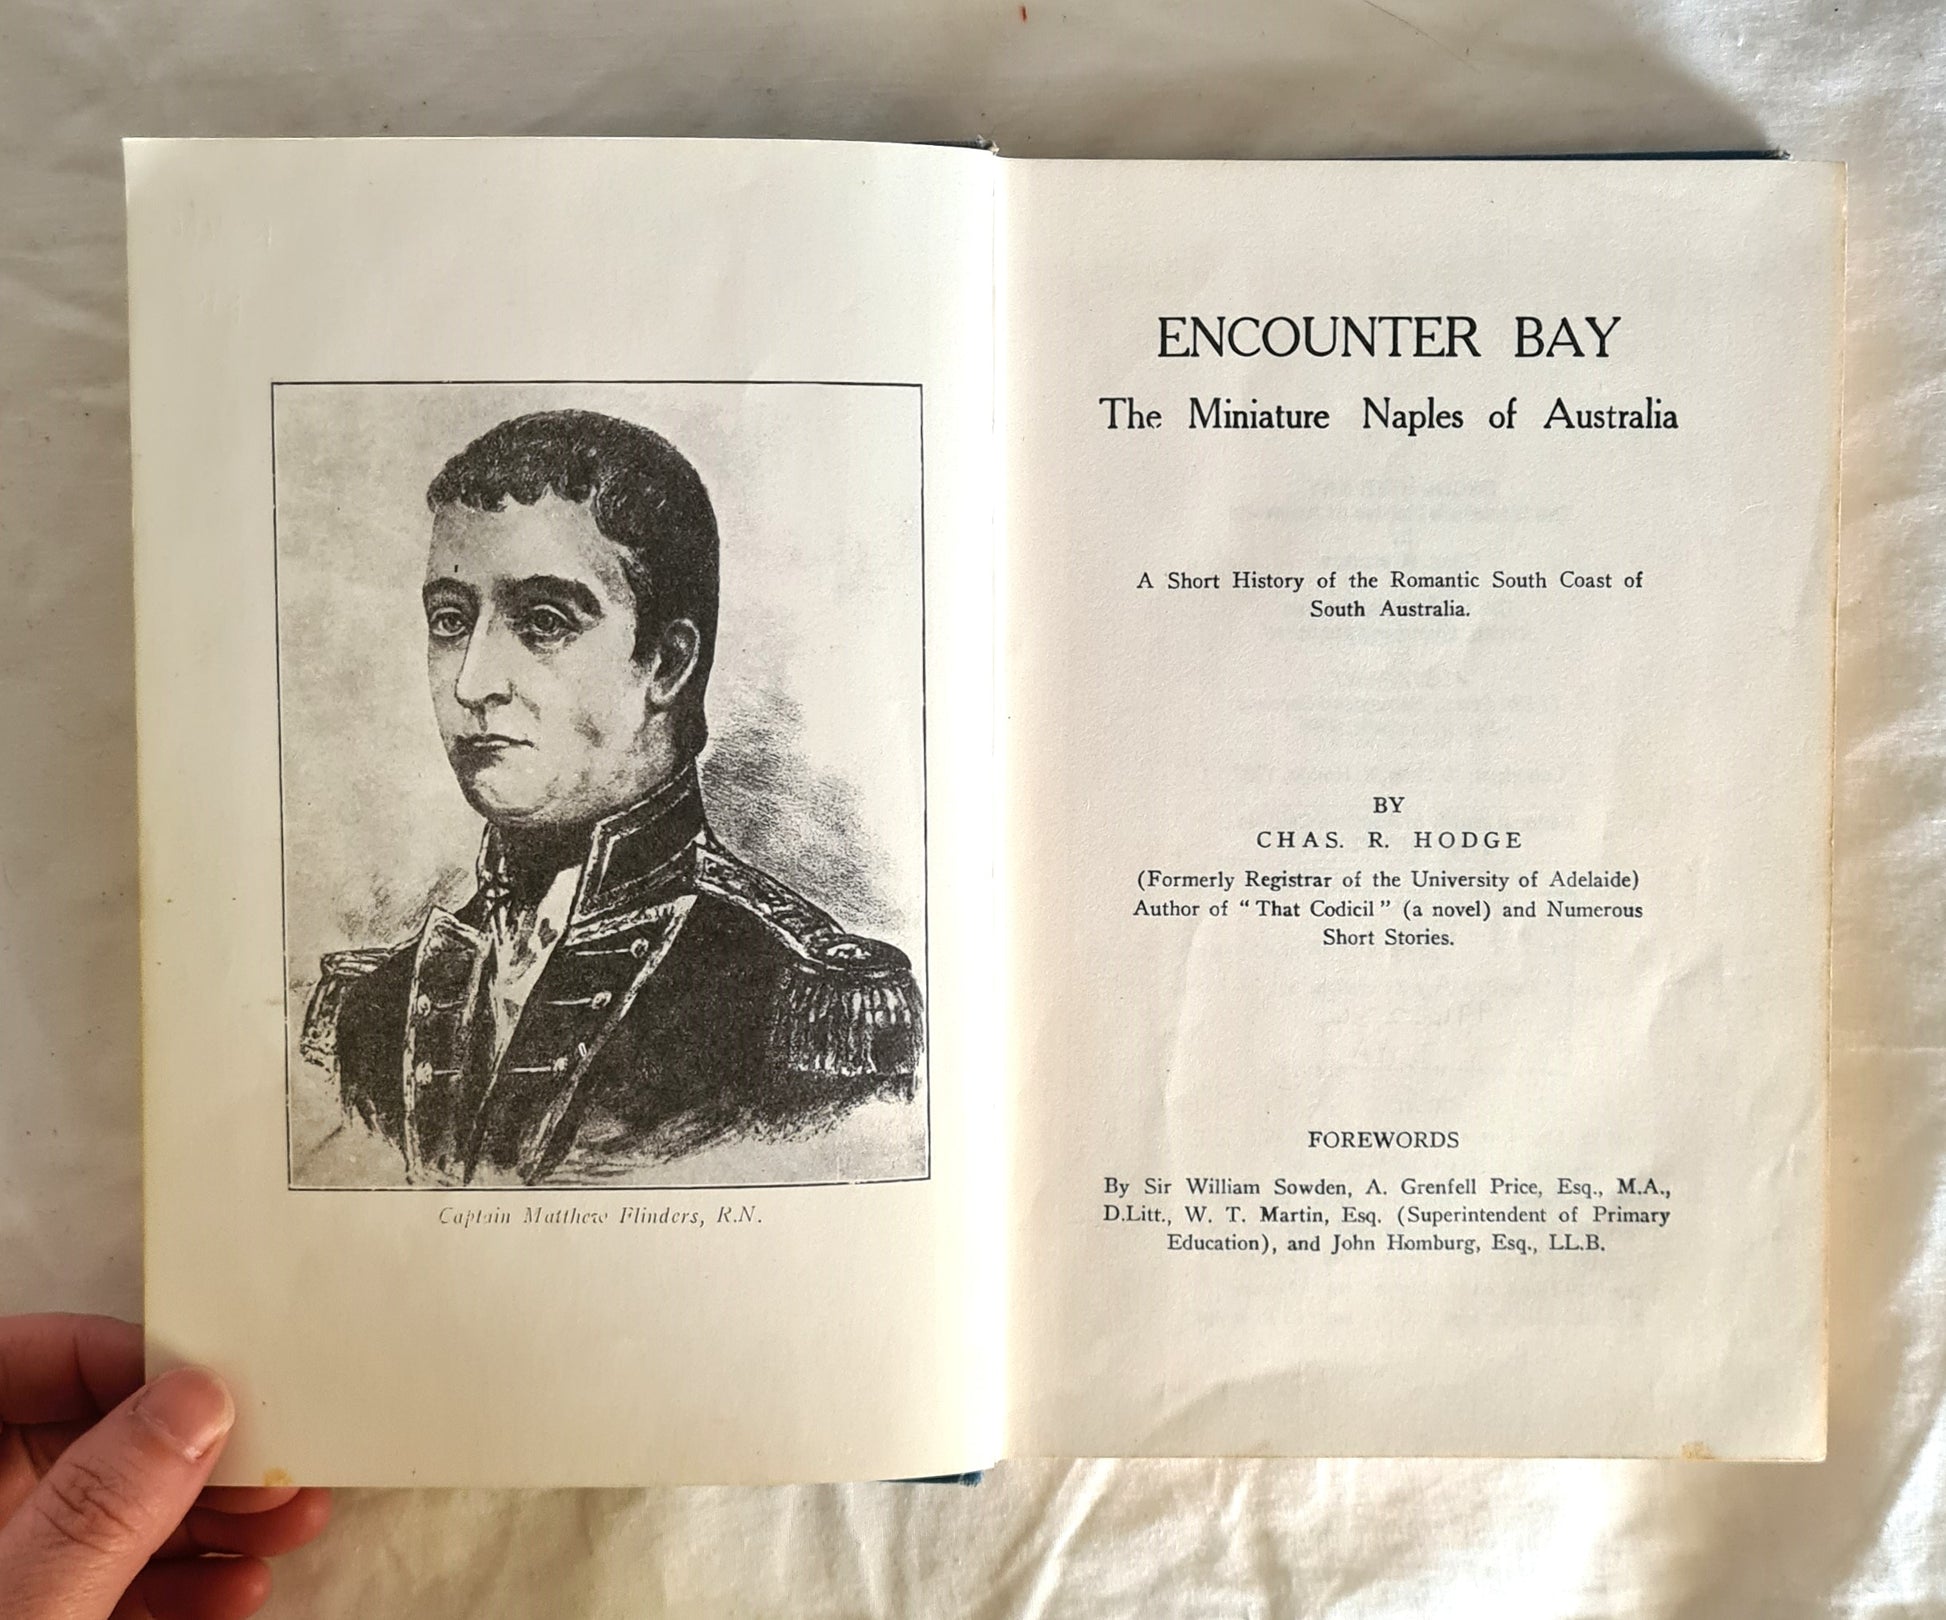 Encounter Bay  The Miniature Naples of Australia  A Short History of the Romantic South Coast of South Australia  by Chas R. Hodge